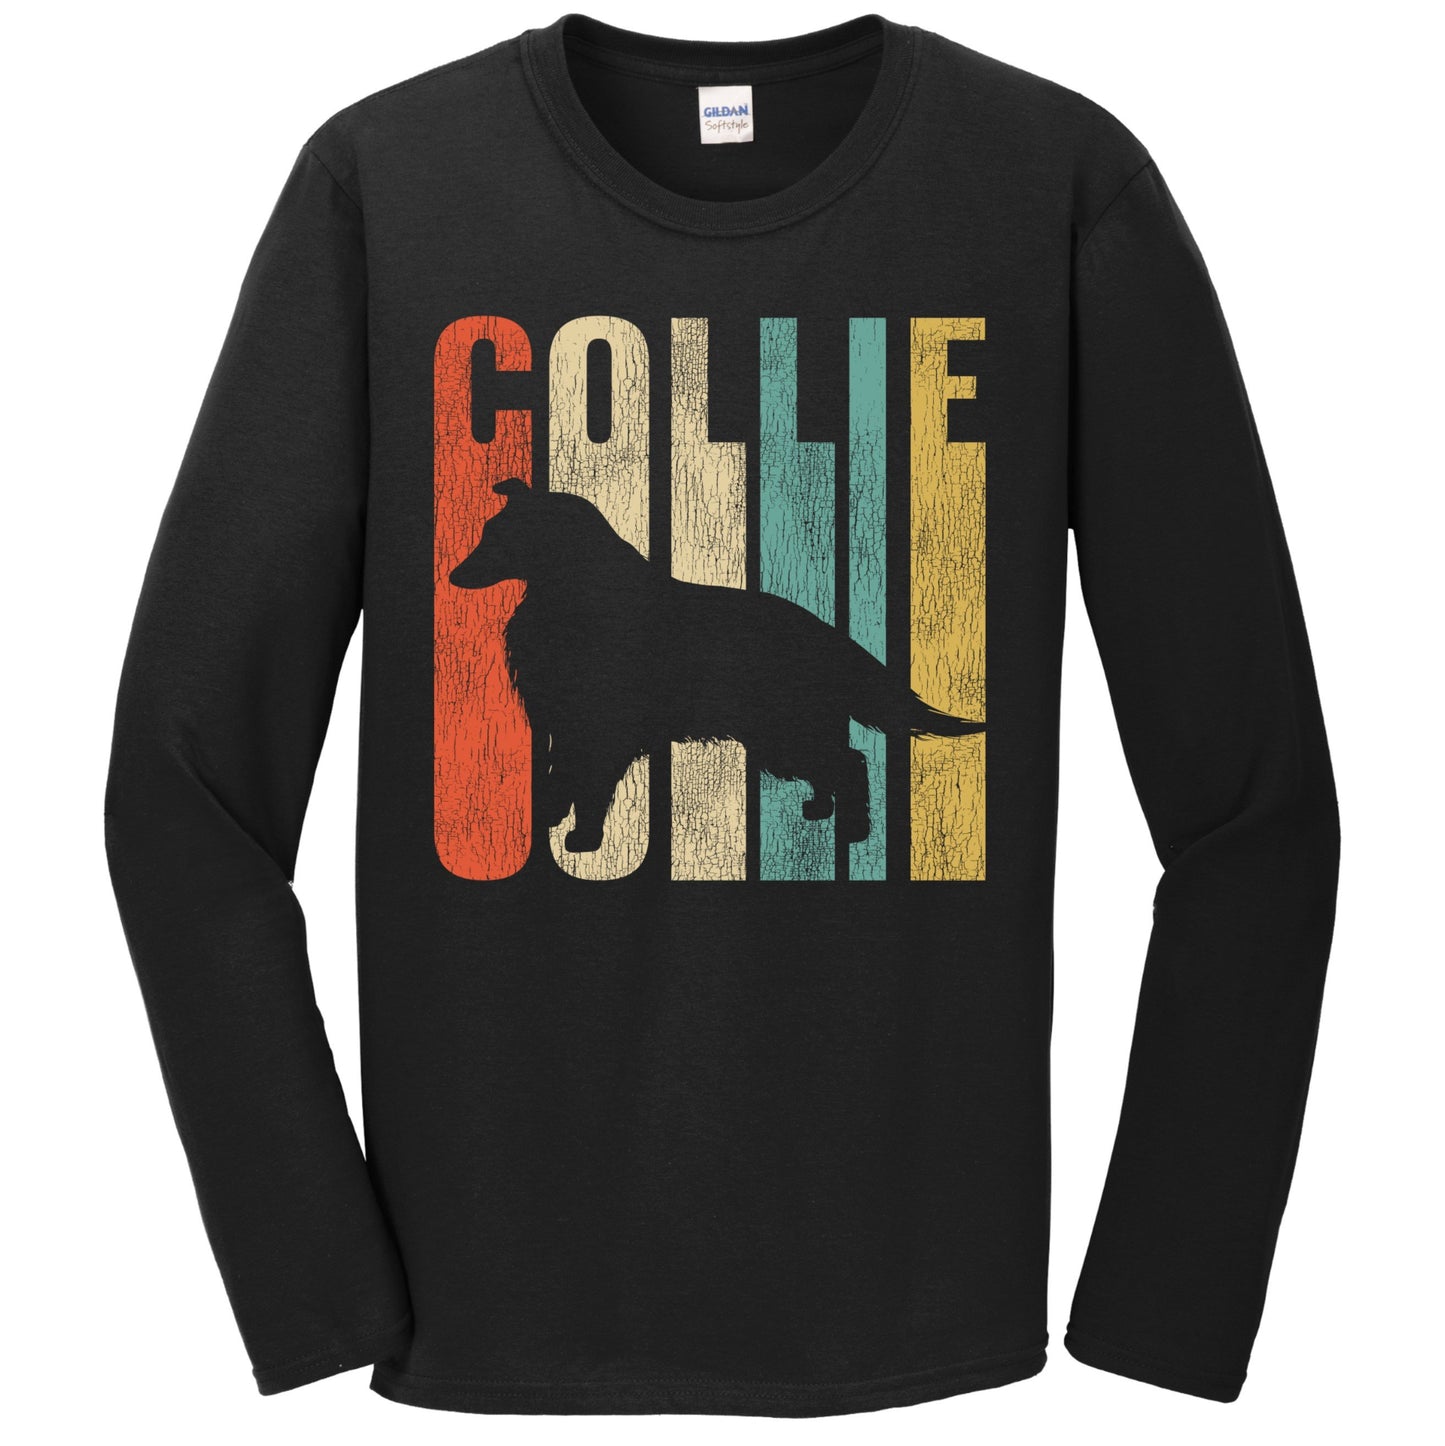 Retro 1970's Style Collie Dog Silhouette Cracked Distressed Long Sleeve T-Shirt